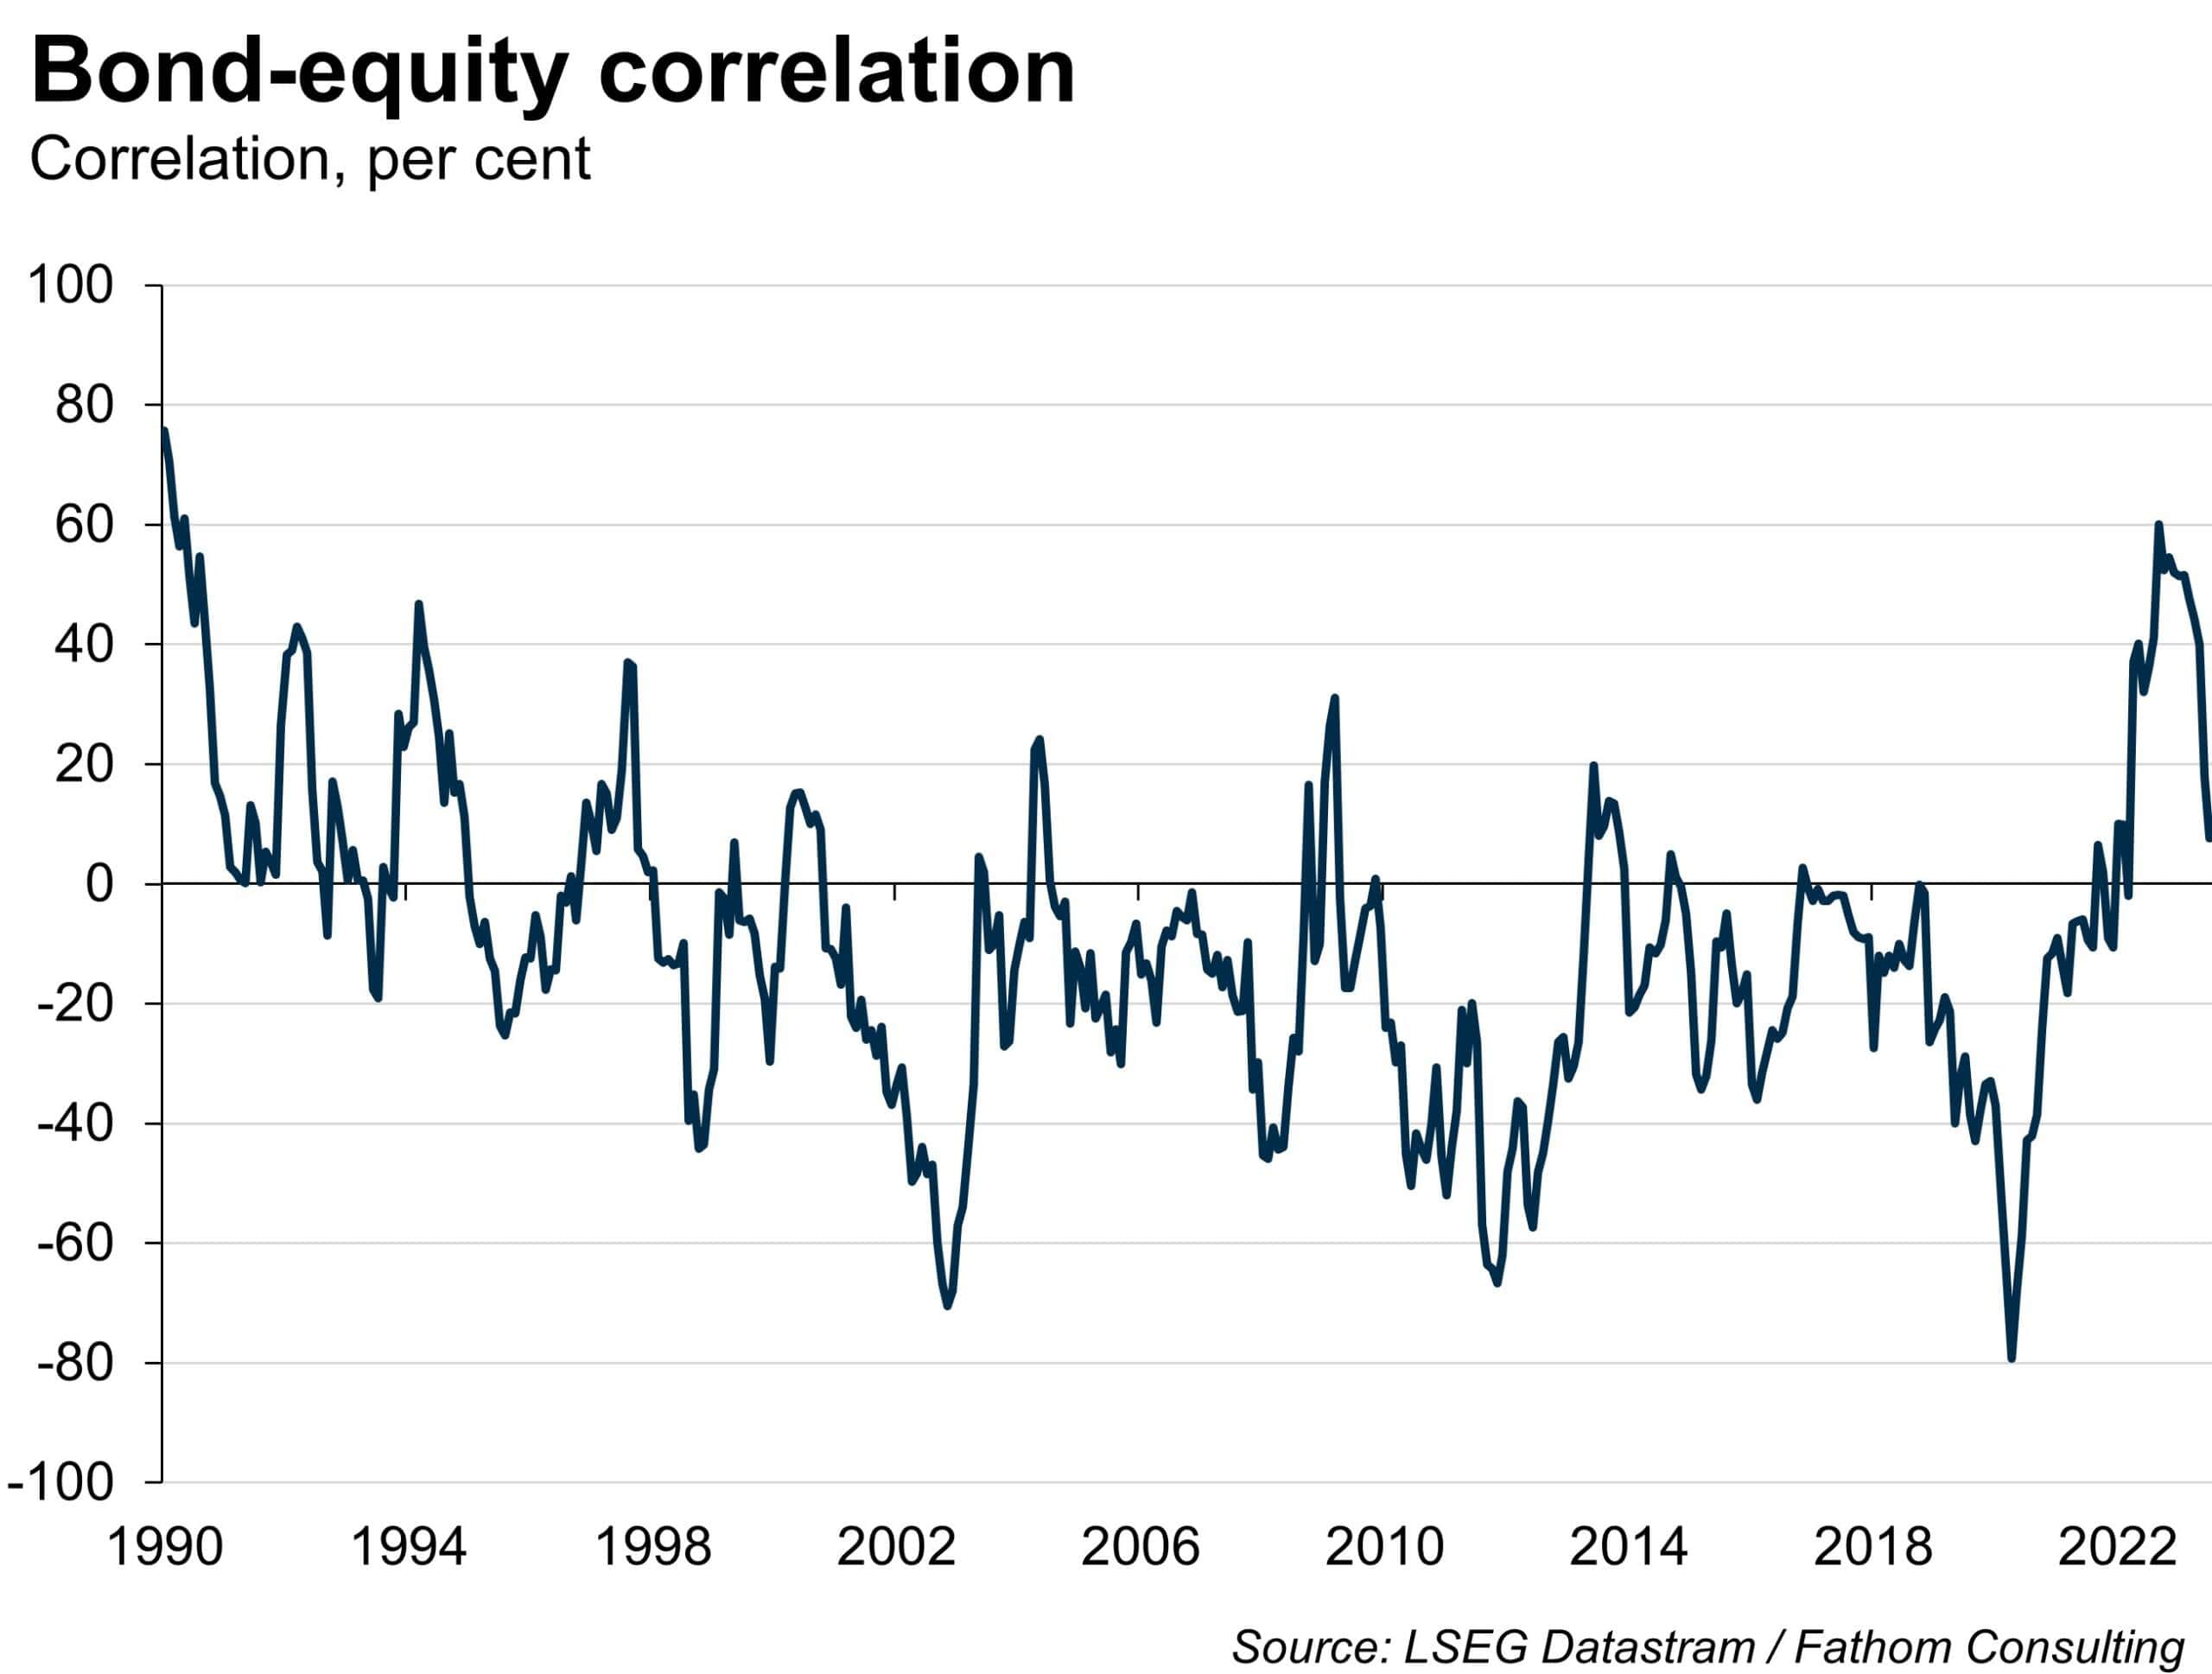 Bond-equity correlation (1990 to current), as per cent